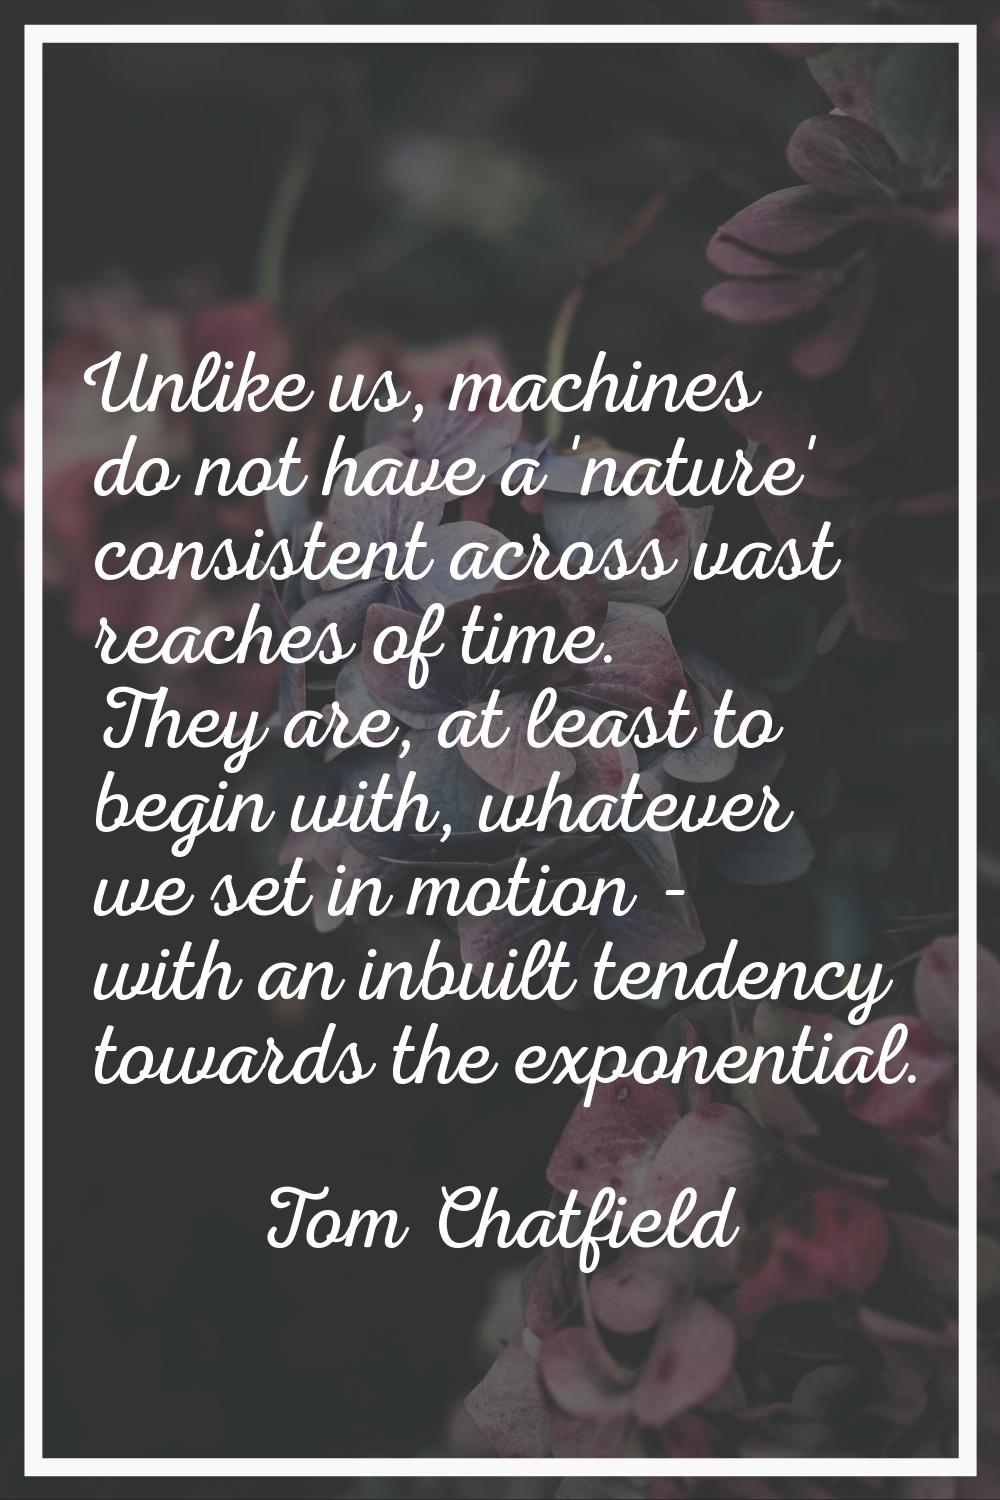 Unlike us, machines do not have a 'nature' consistent across vast reaches of time. They are, at lea